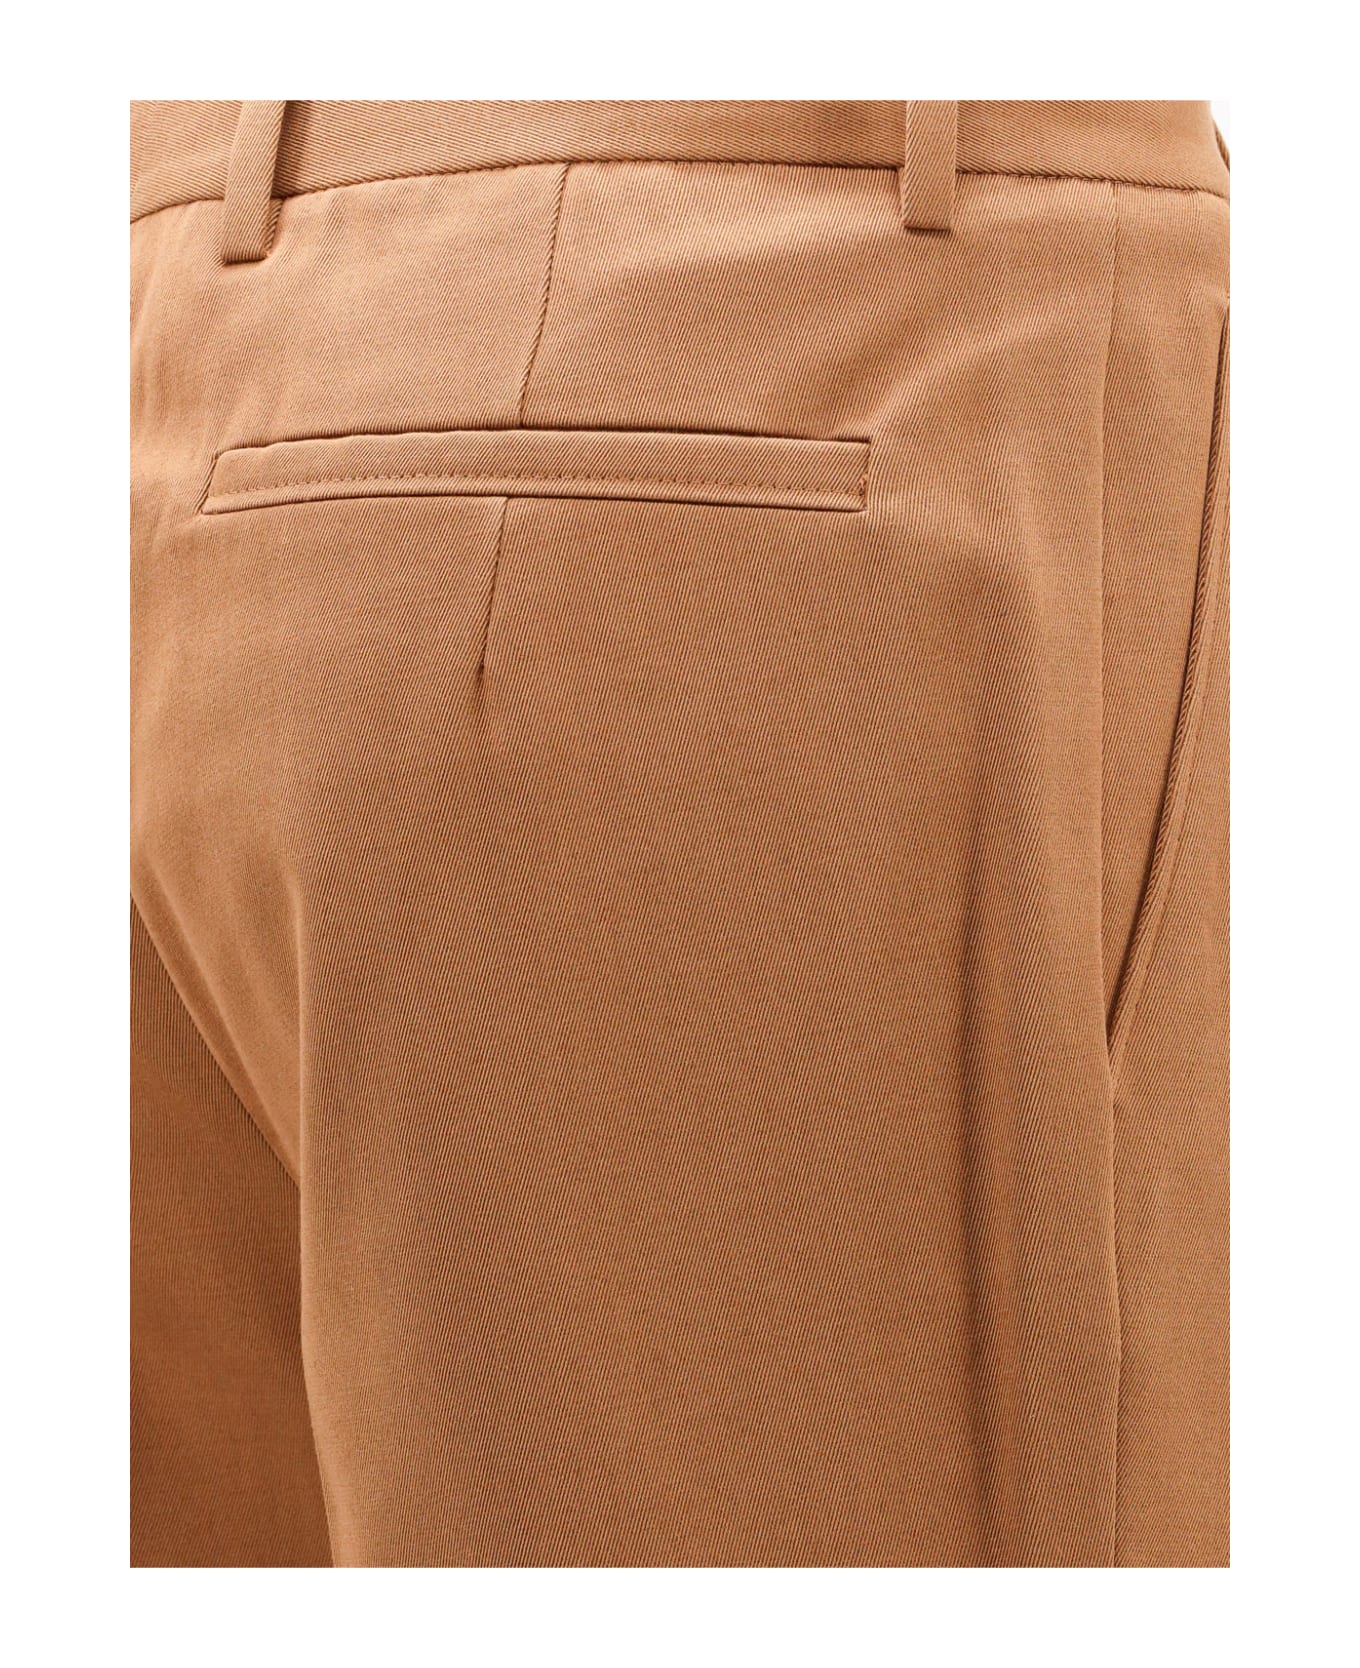 Zegna Trouser - Brown ボトムス